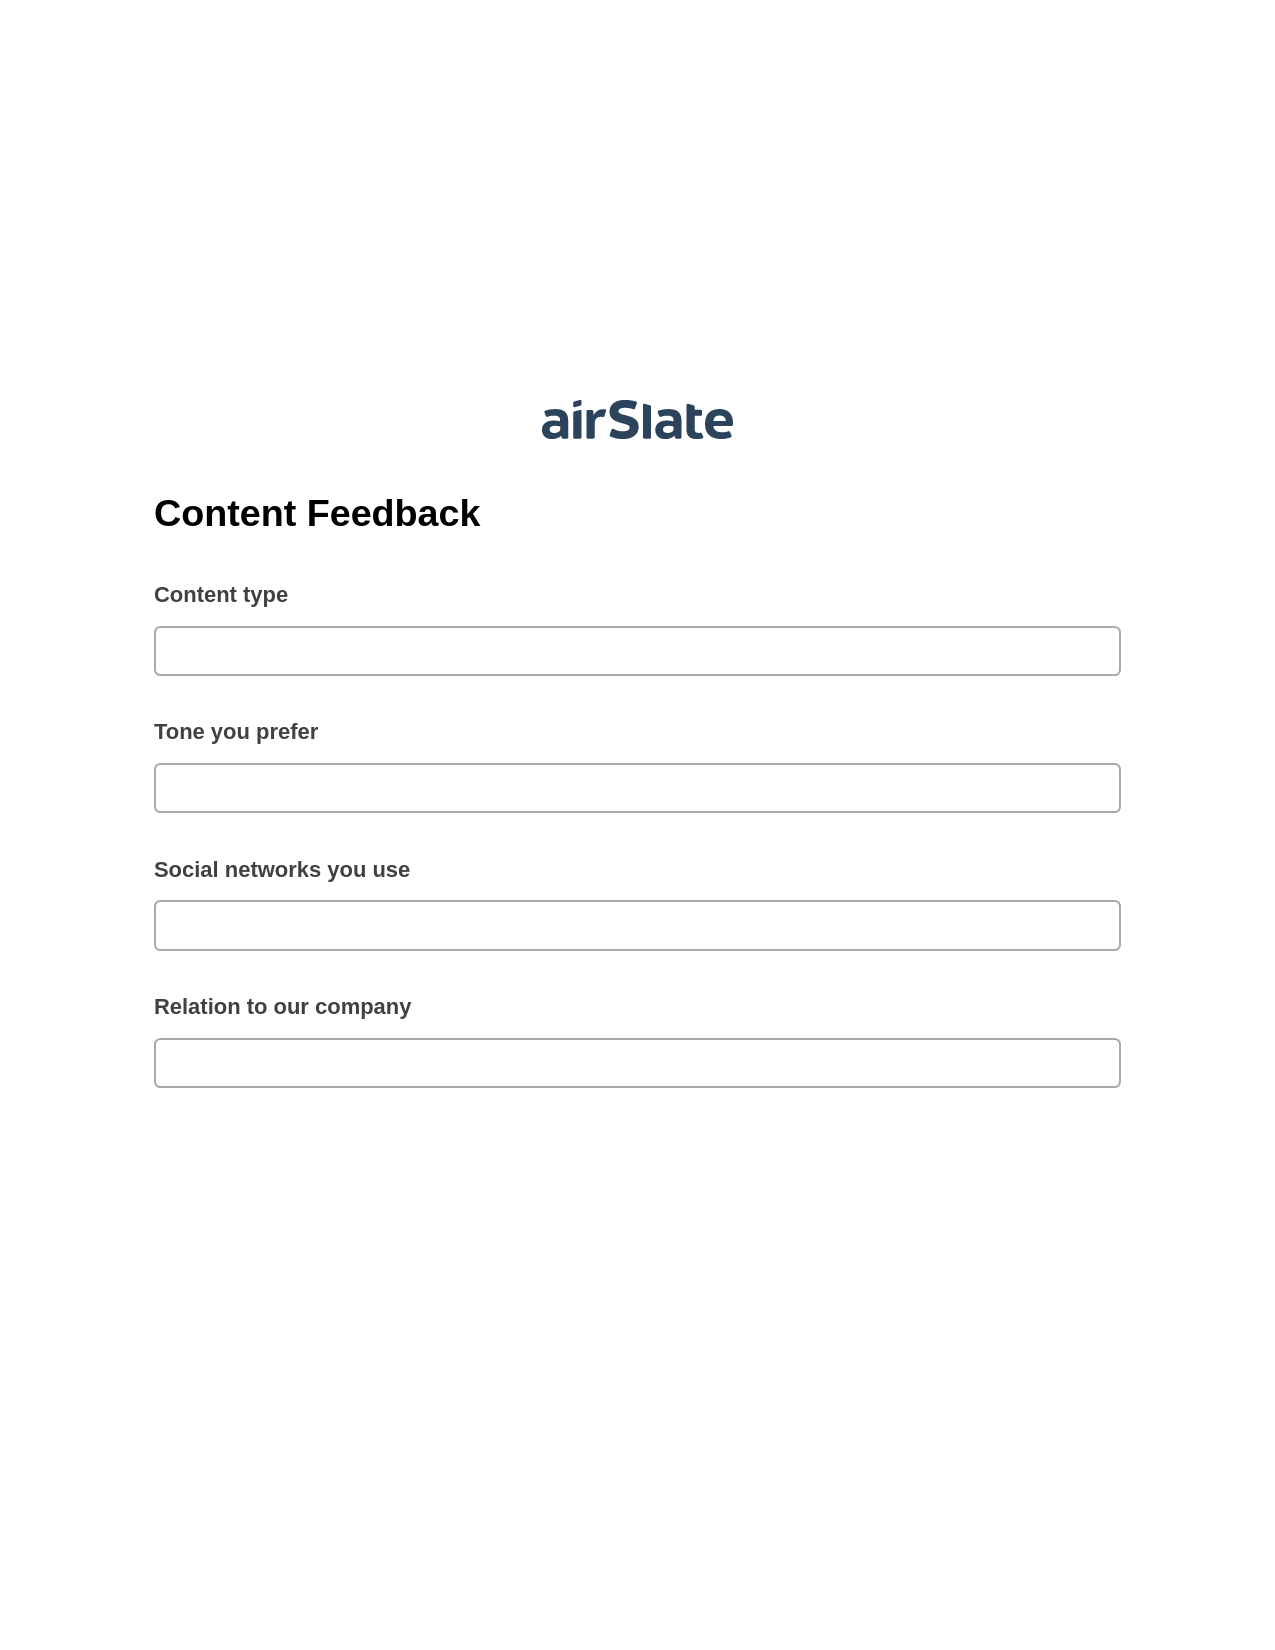 Content Feedback Pre-fill from CSV File Bot, Revoke Access Bot, Post-finish Document Bot